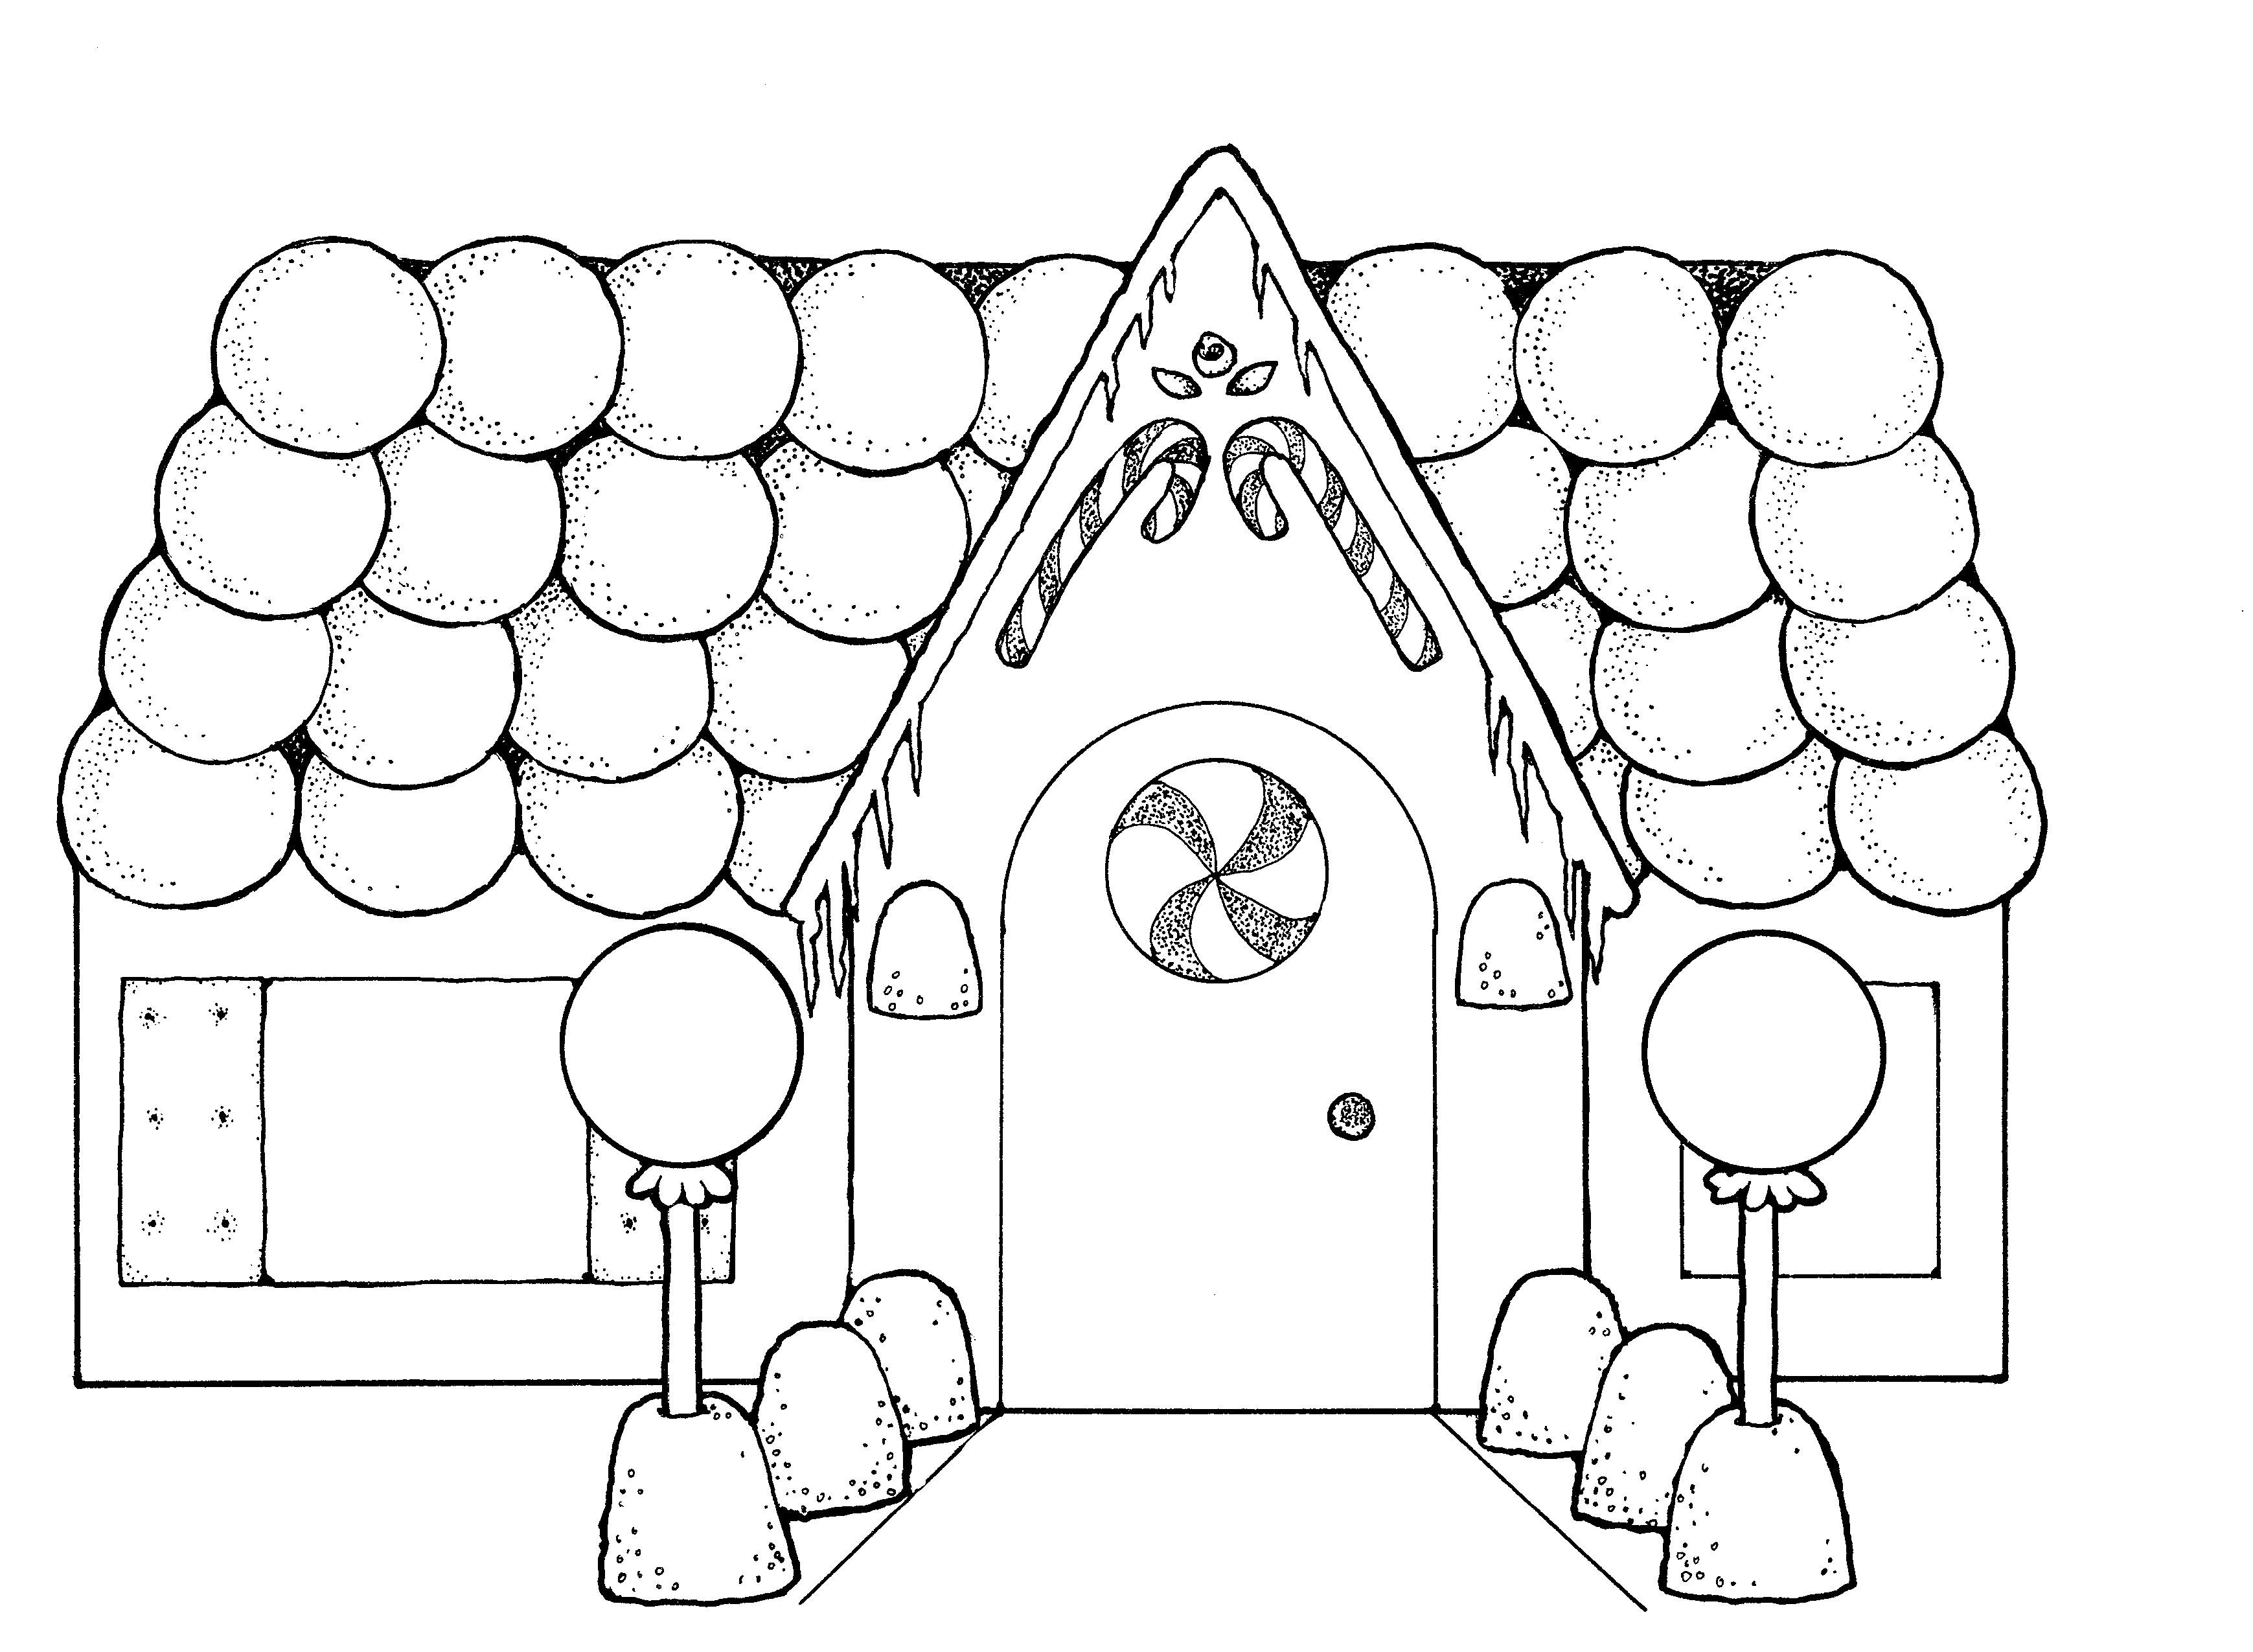 Winter Scene Coloring Pages - HiColoringPages